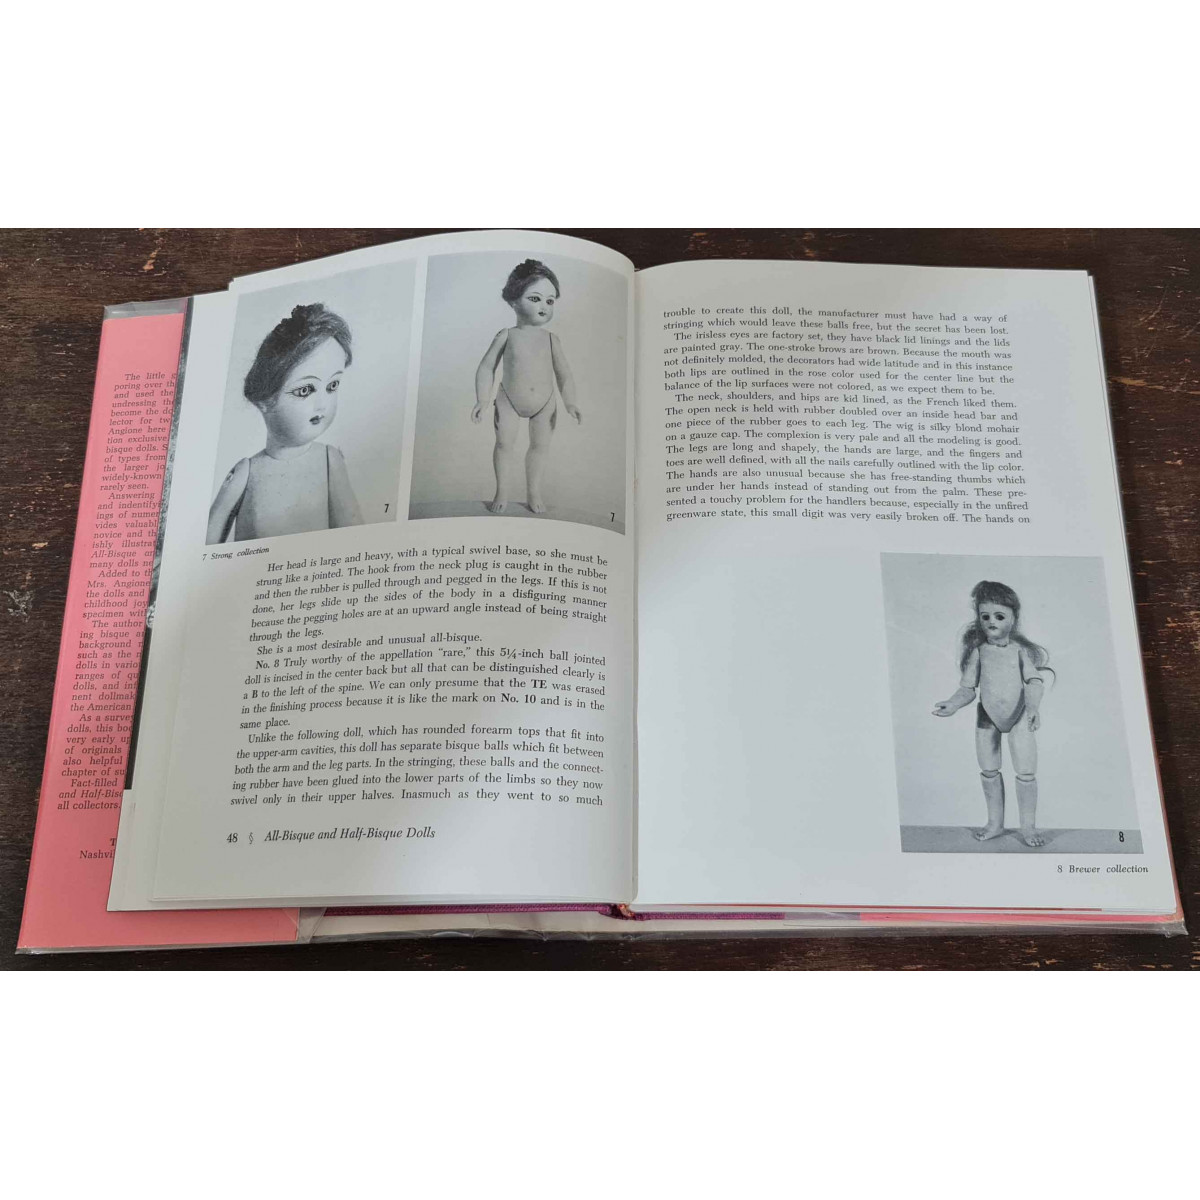 The Complete Book of All-Bisque Dolls